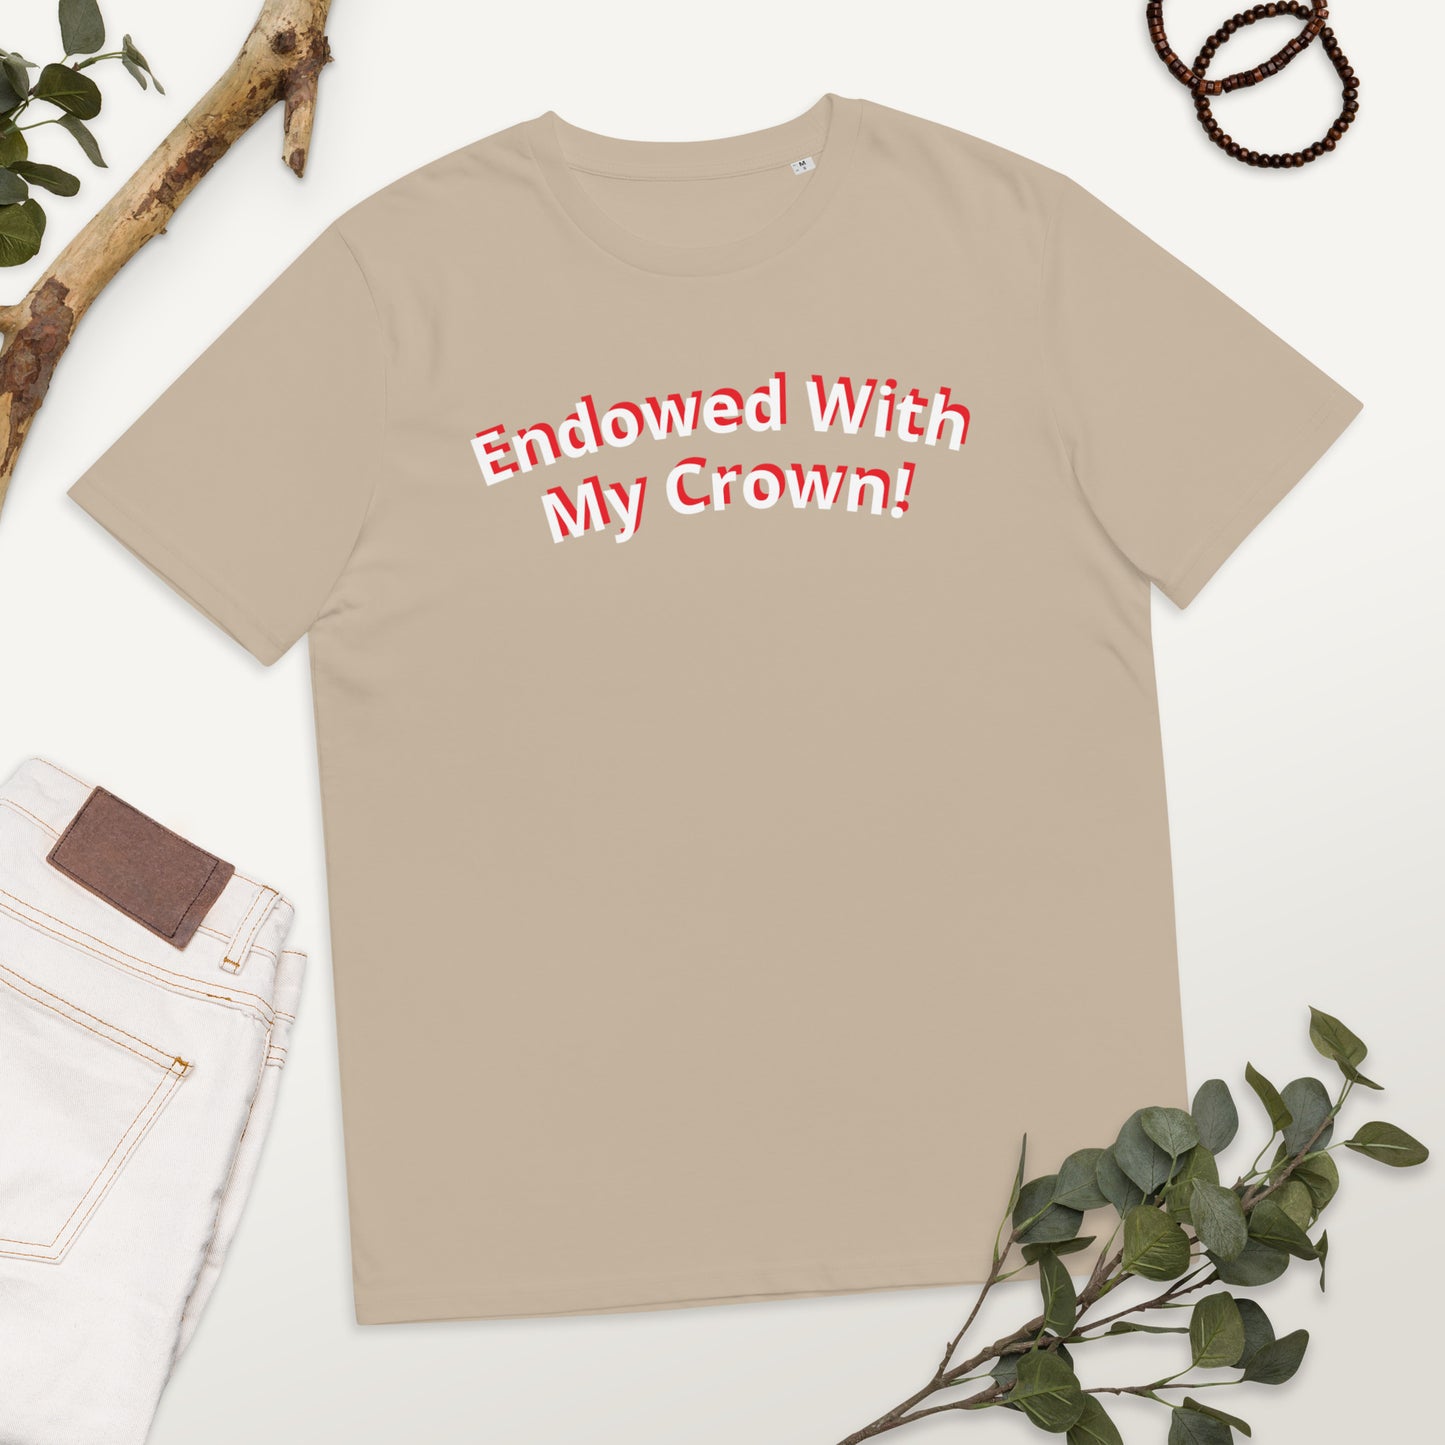 Endowed With My Crown! Unisex organic cotton t-shirt